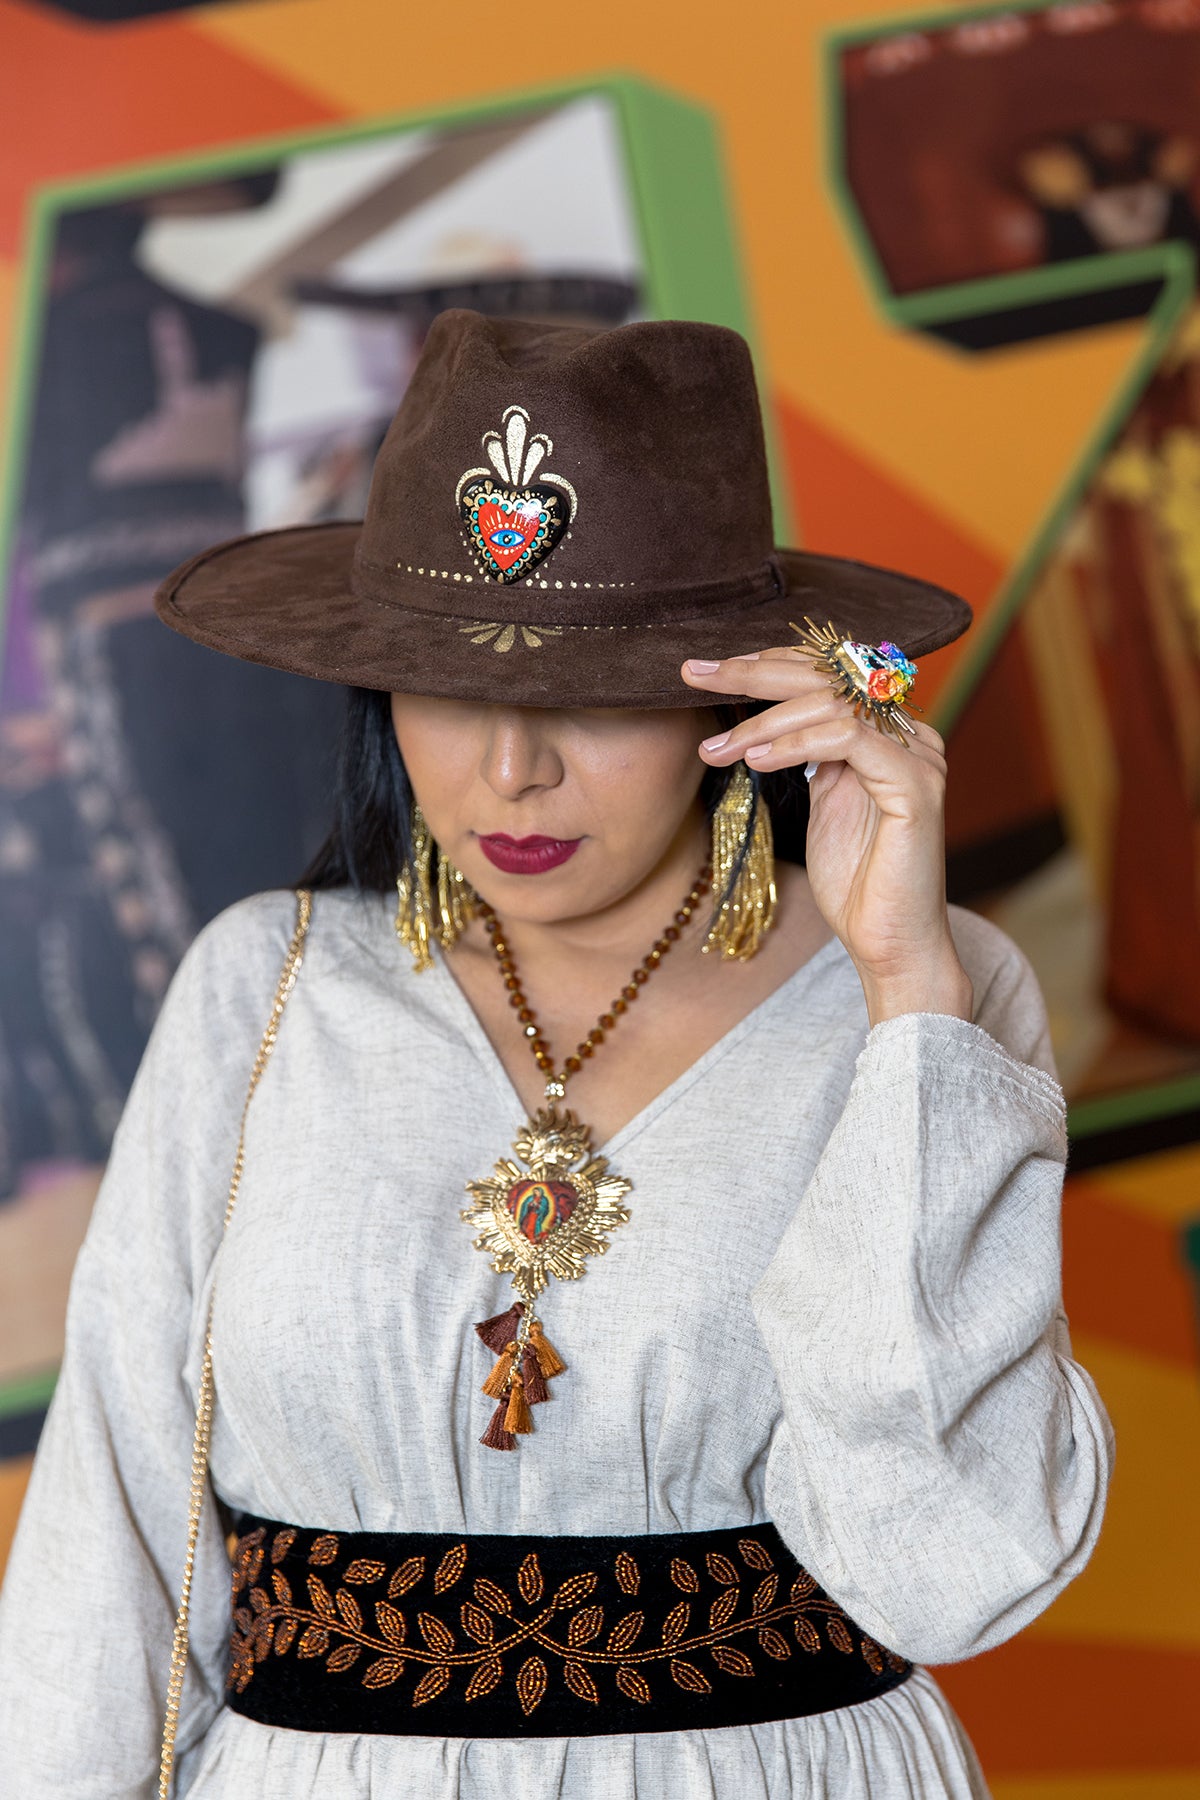 A woman in a handmade white blouse is wearing a brown hat inspired by Mexican culture. In the center of the hat is a famous red carazon with a painted eye, and she is accessorized with a gold virgin of guadalupe necklace and long earrings. On the right hand she has a white catrina ring made with paper mache